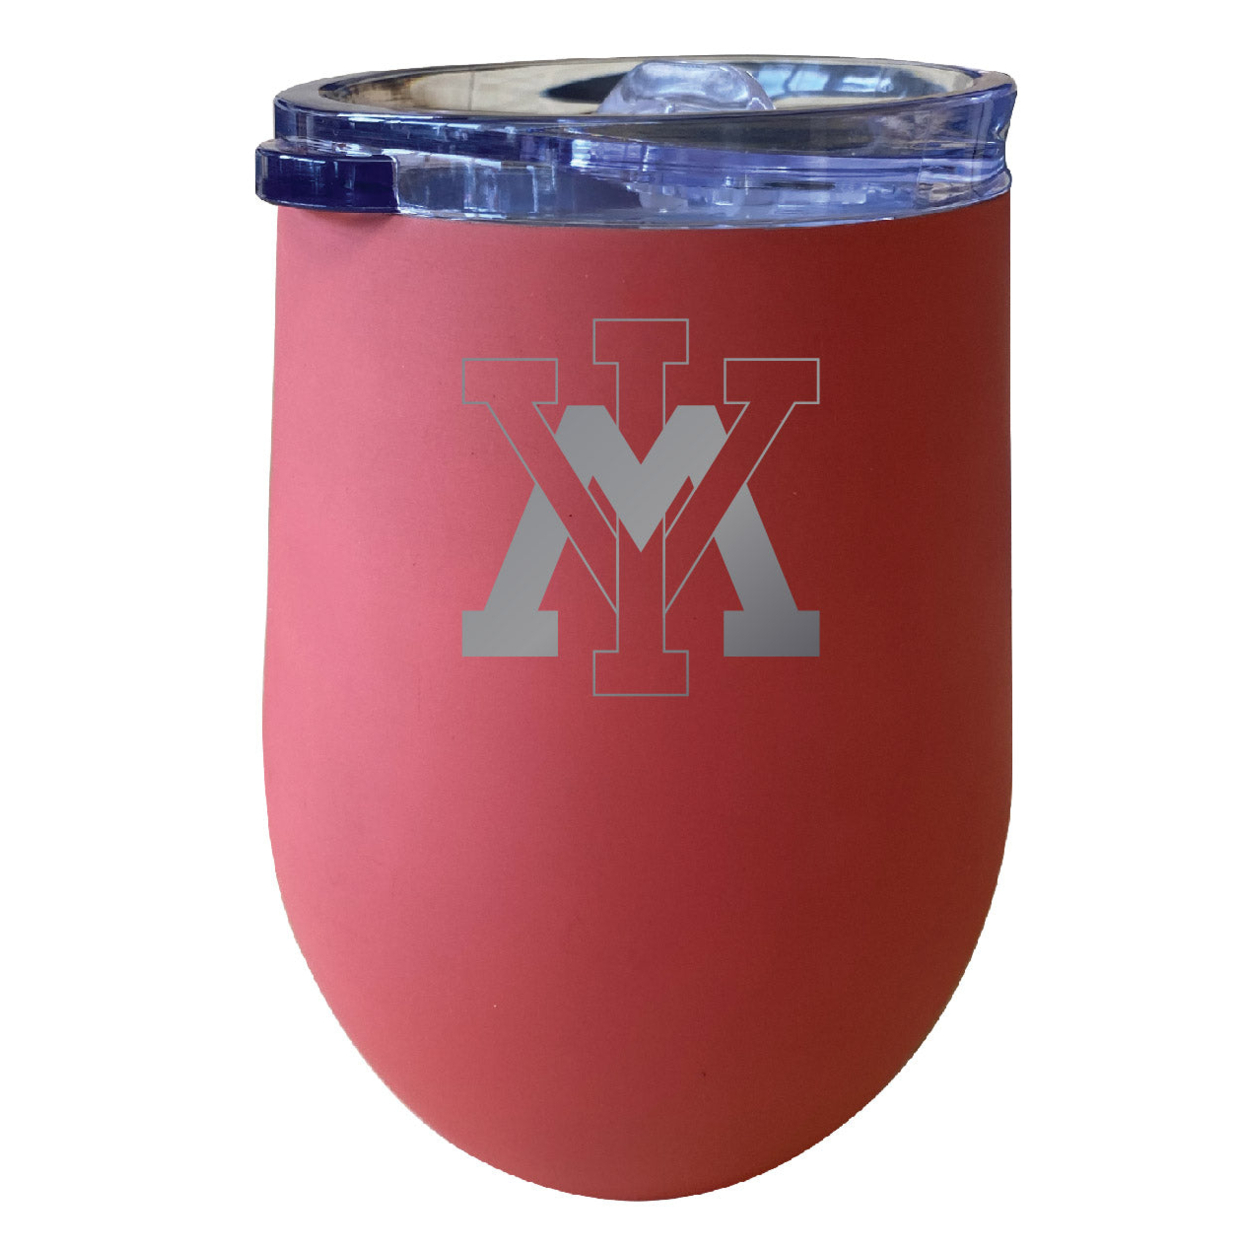 VMI Keydets 12 Oz Etched Insulated Wine Stainless Steel Tumbler - Choose Your Color - Coral